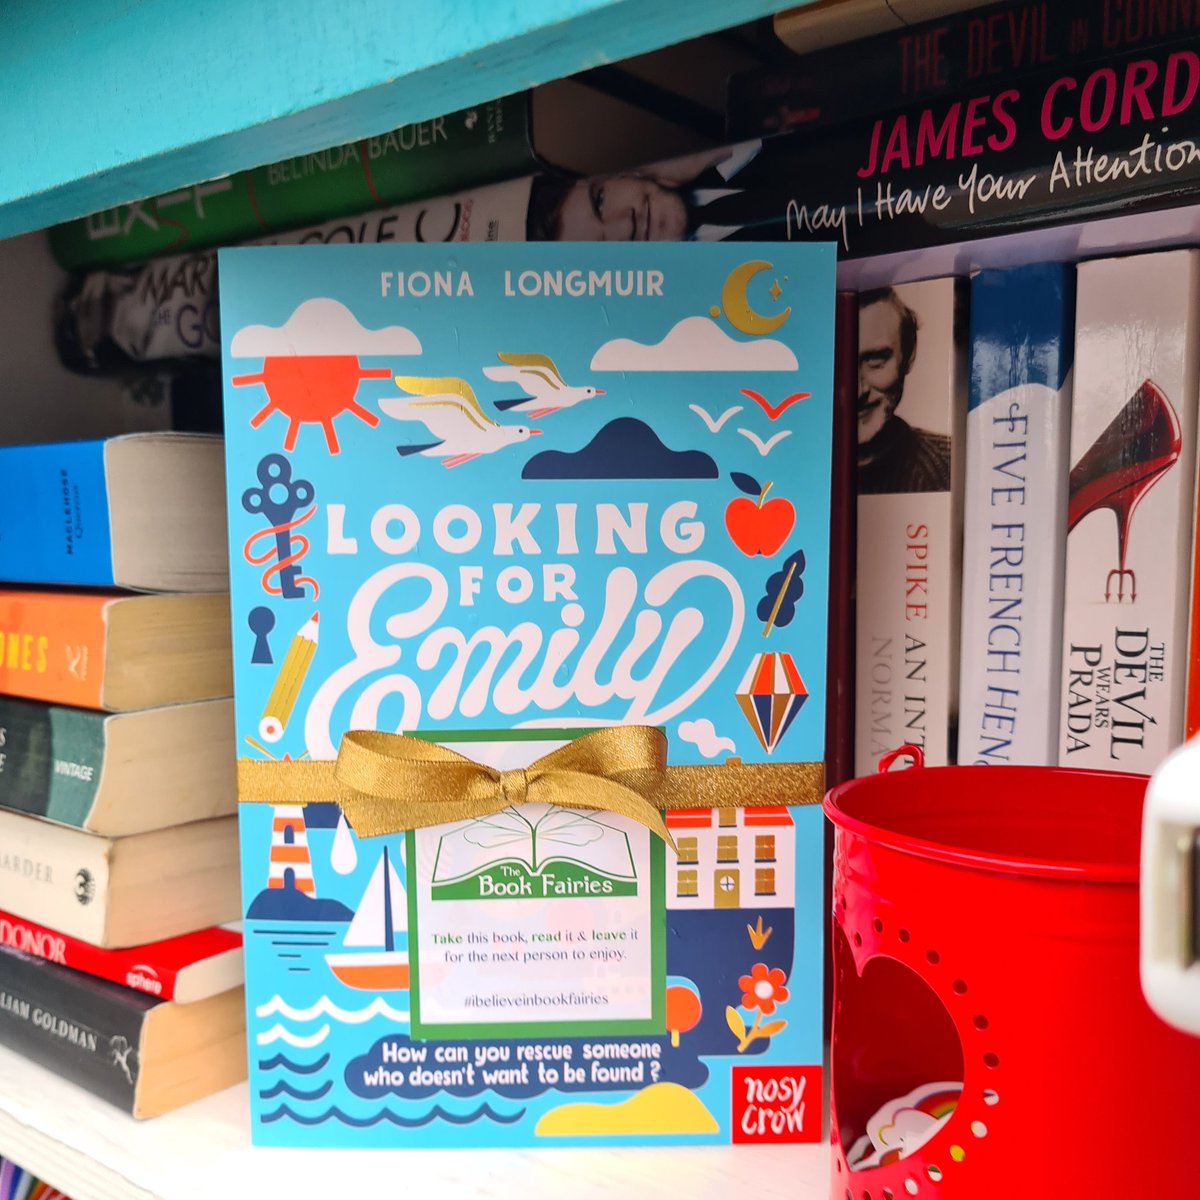 'Welcome to the Museum of Emily. Please follow the arrows...' The Book Fairies are hiding copies of @fionalongmuir's #LookingForEmily today. A copy has been hidden in the Little Book House in Dunfermline. #IBelieveInBookFairies #TBFEmily #TBFNosyCrow #DebutBookFairies